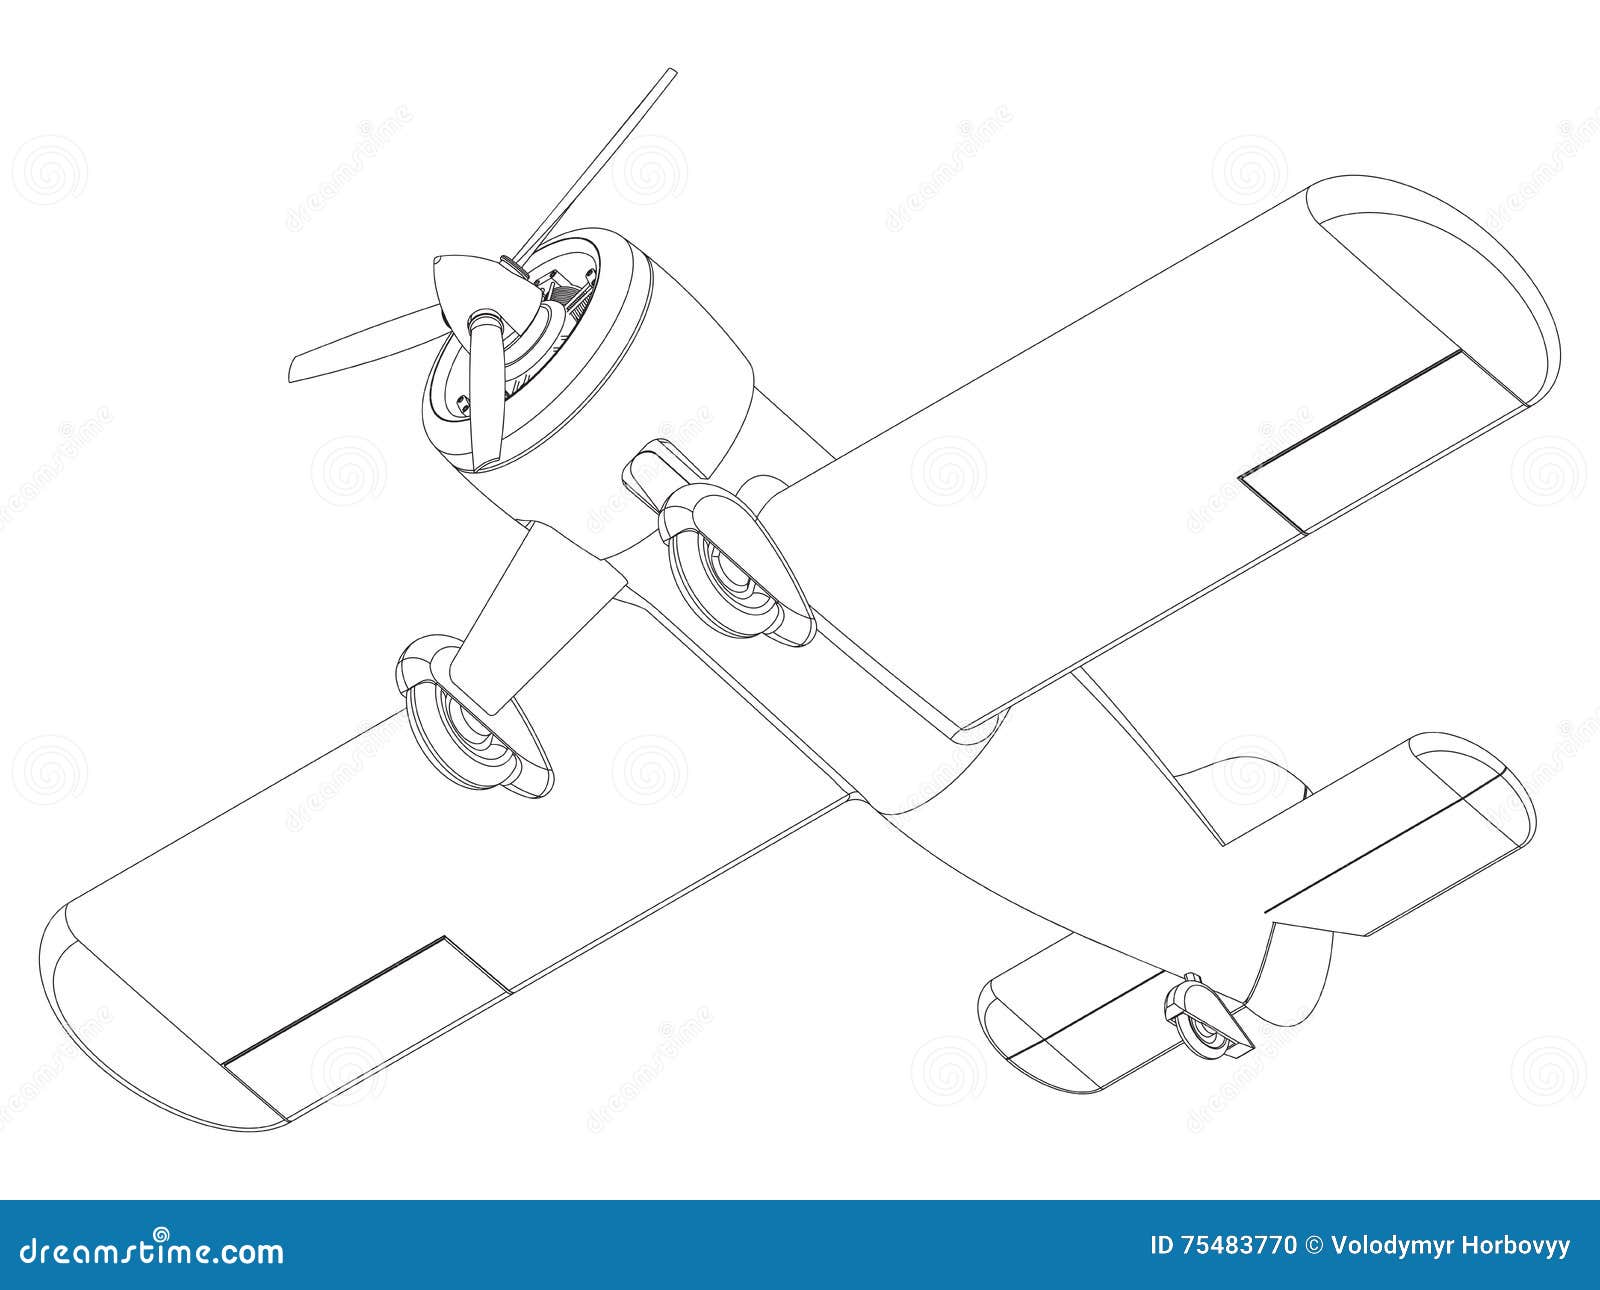 PROPELLER VISUAL TECHNICAL INSPECTION REPORT